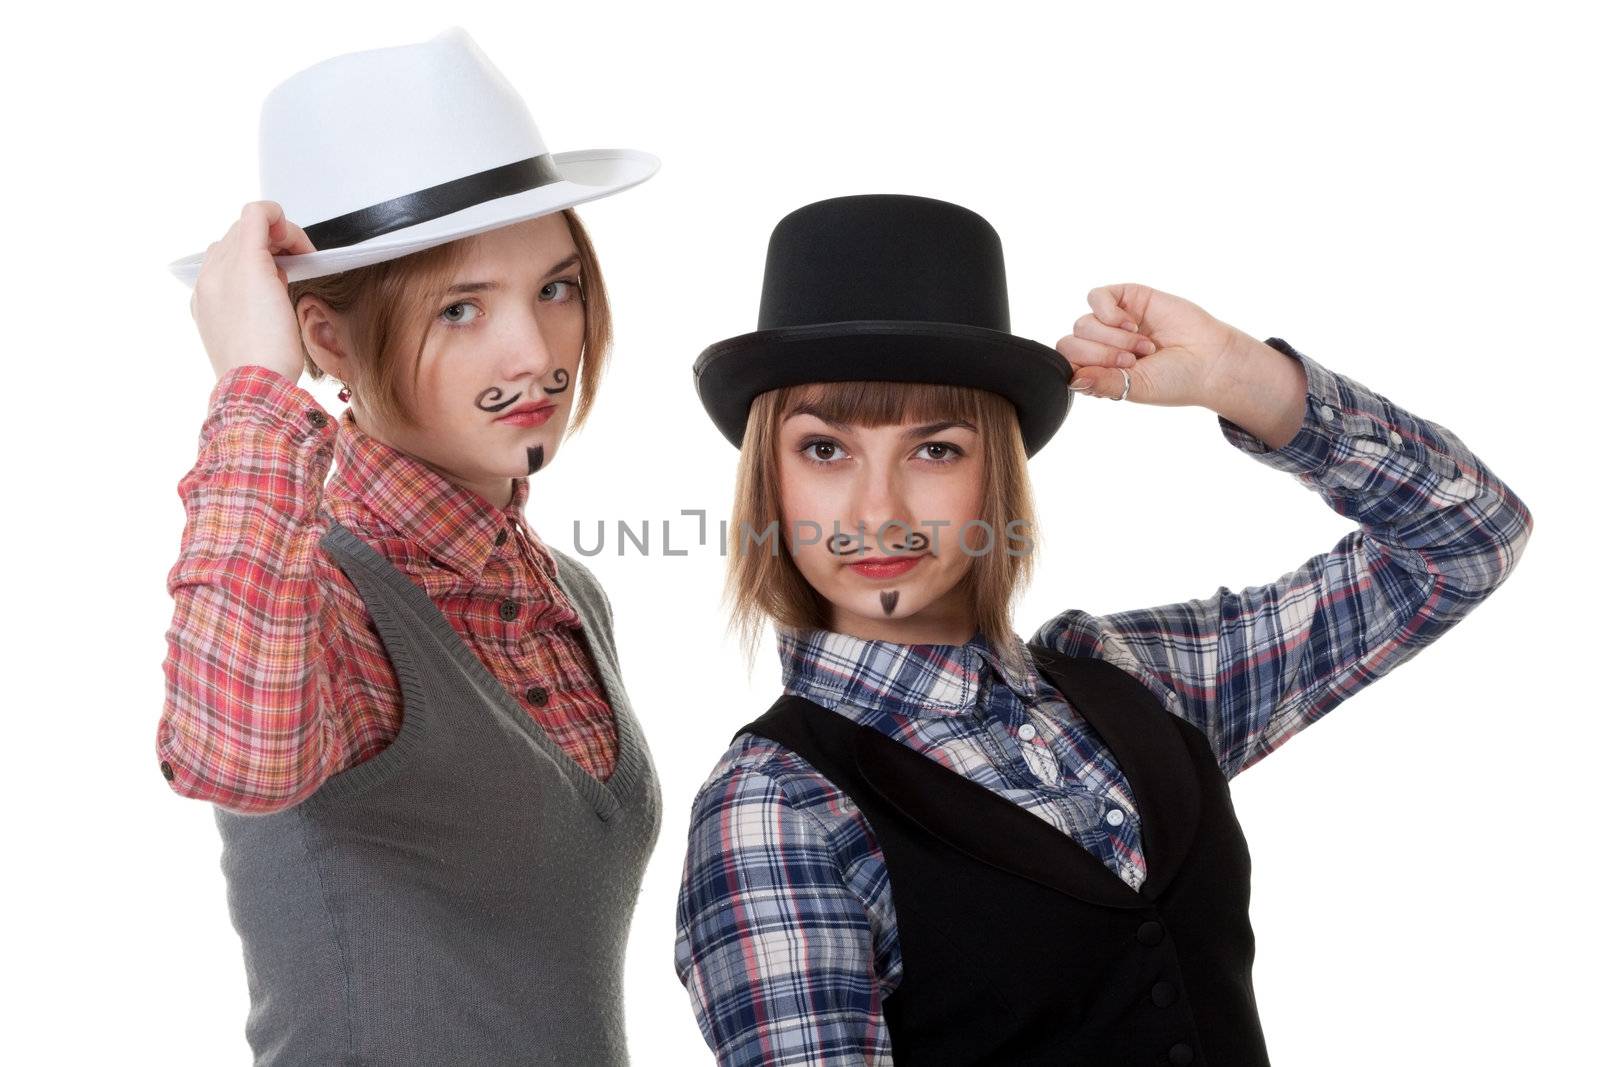 Two girls with painted mustaches and bowler hats on white background